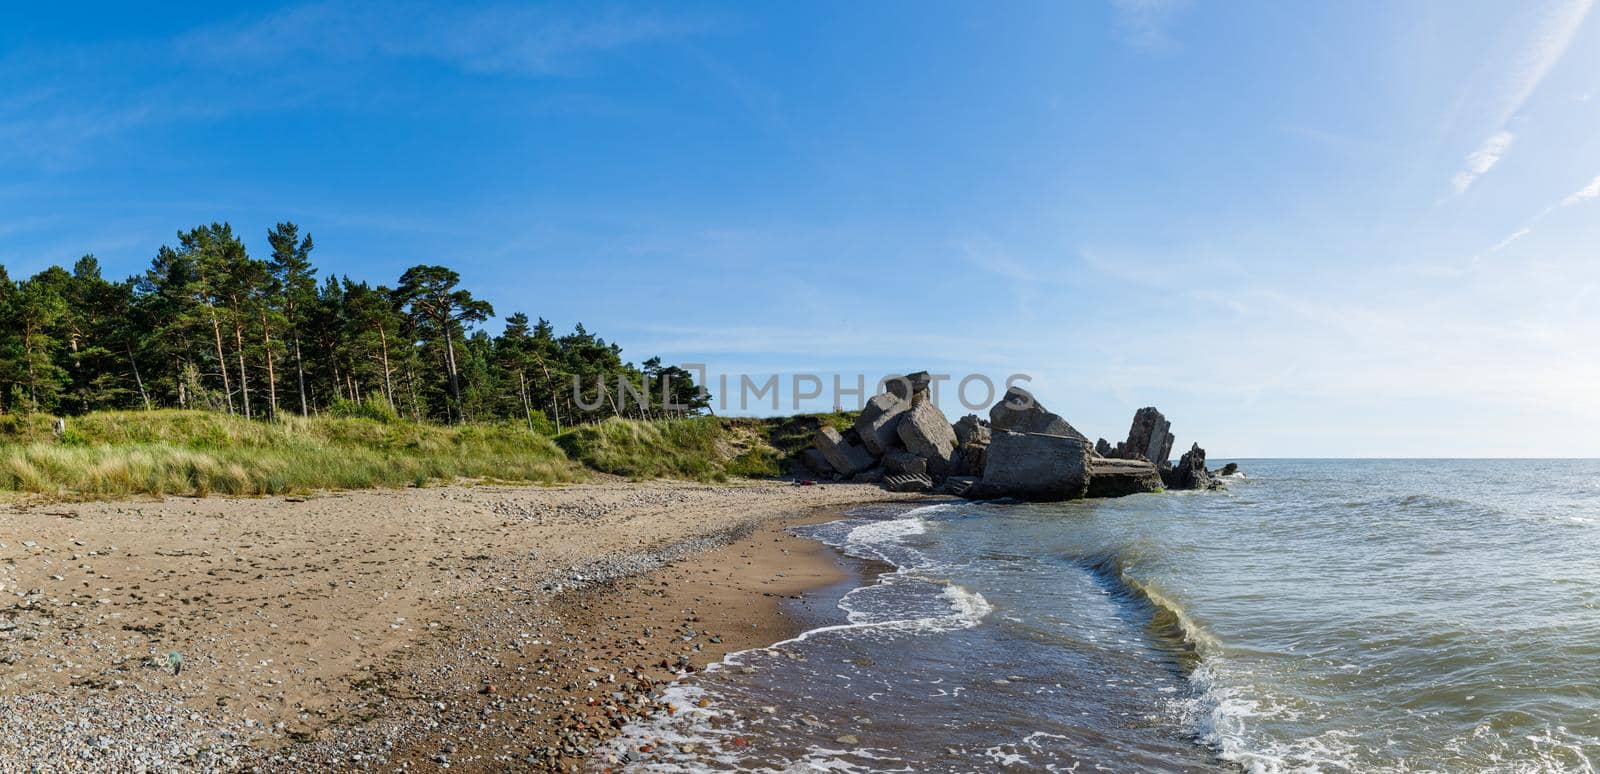 Demolished military fortifications in Liepaja, Latvia. Baltic sea coastline with pine trees and clouds. Classical Baltic beach landscape.